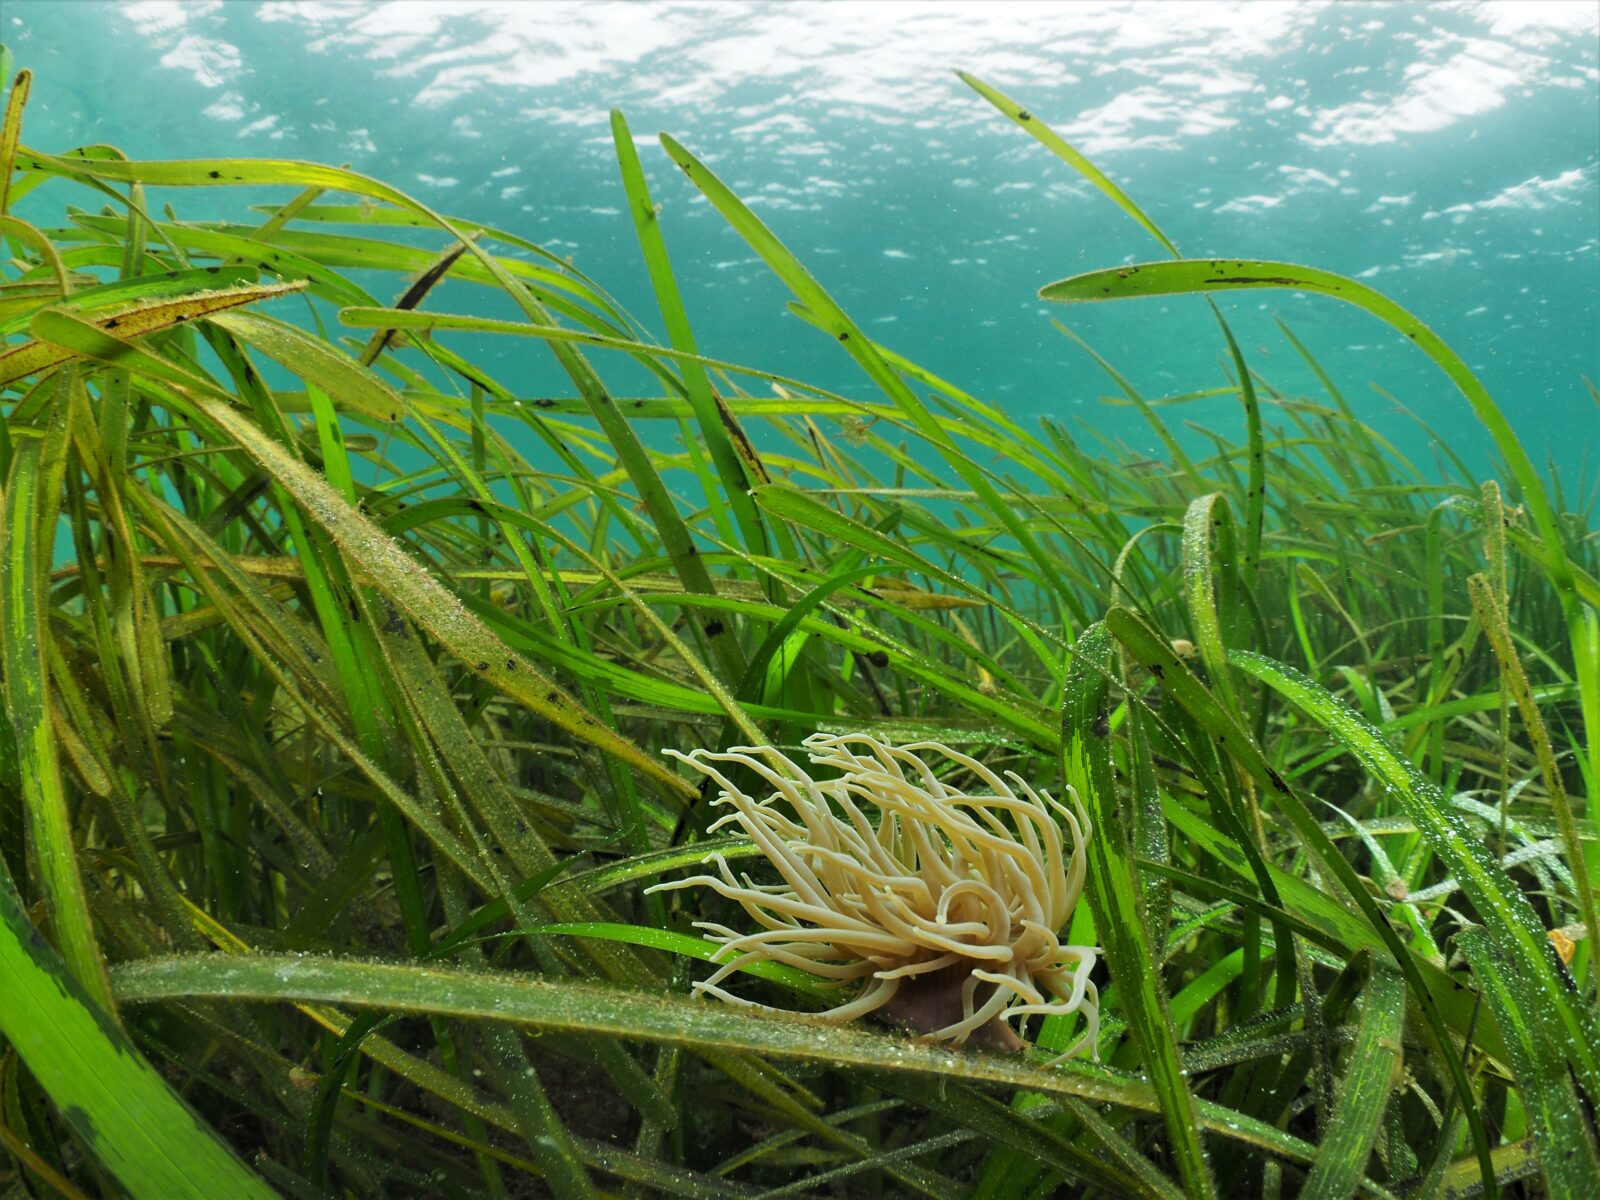 Seagrass, Isles of Scilly, Cornwall, UK Michiel Vos / Ocean Image Bank